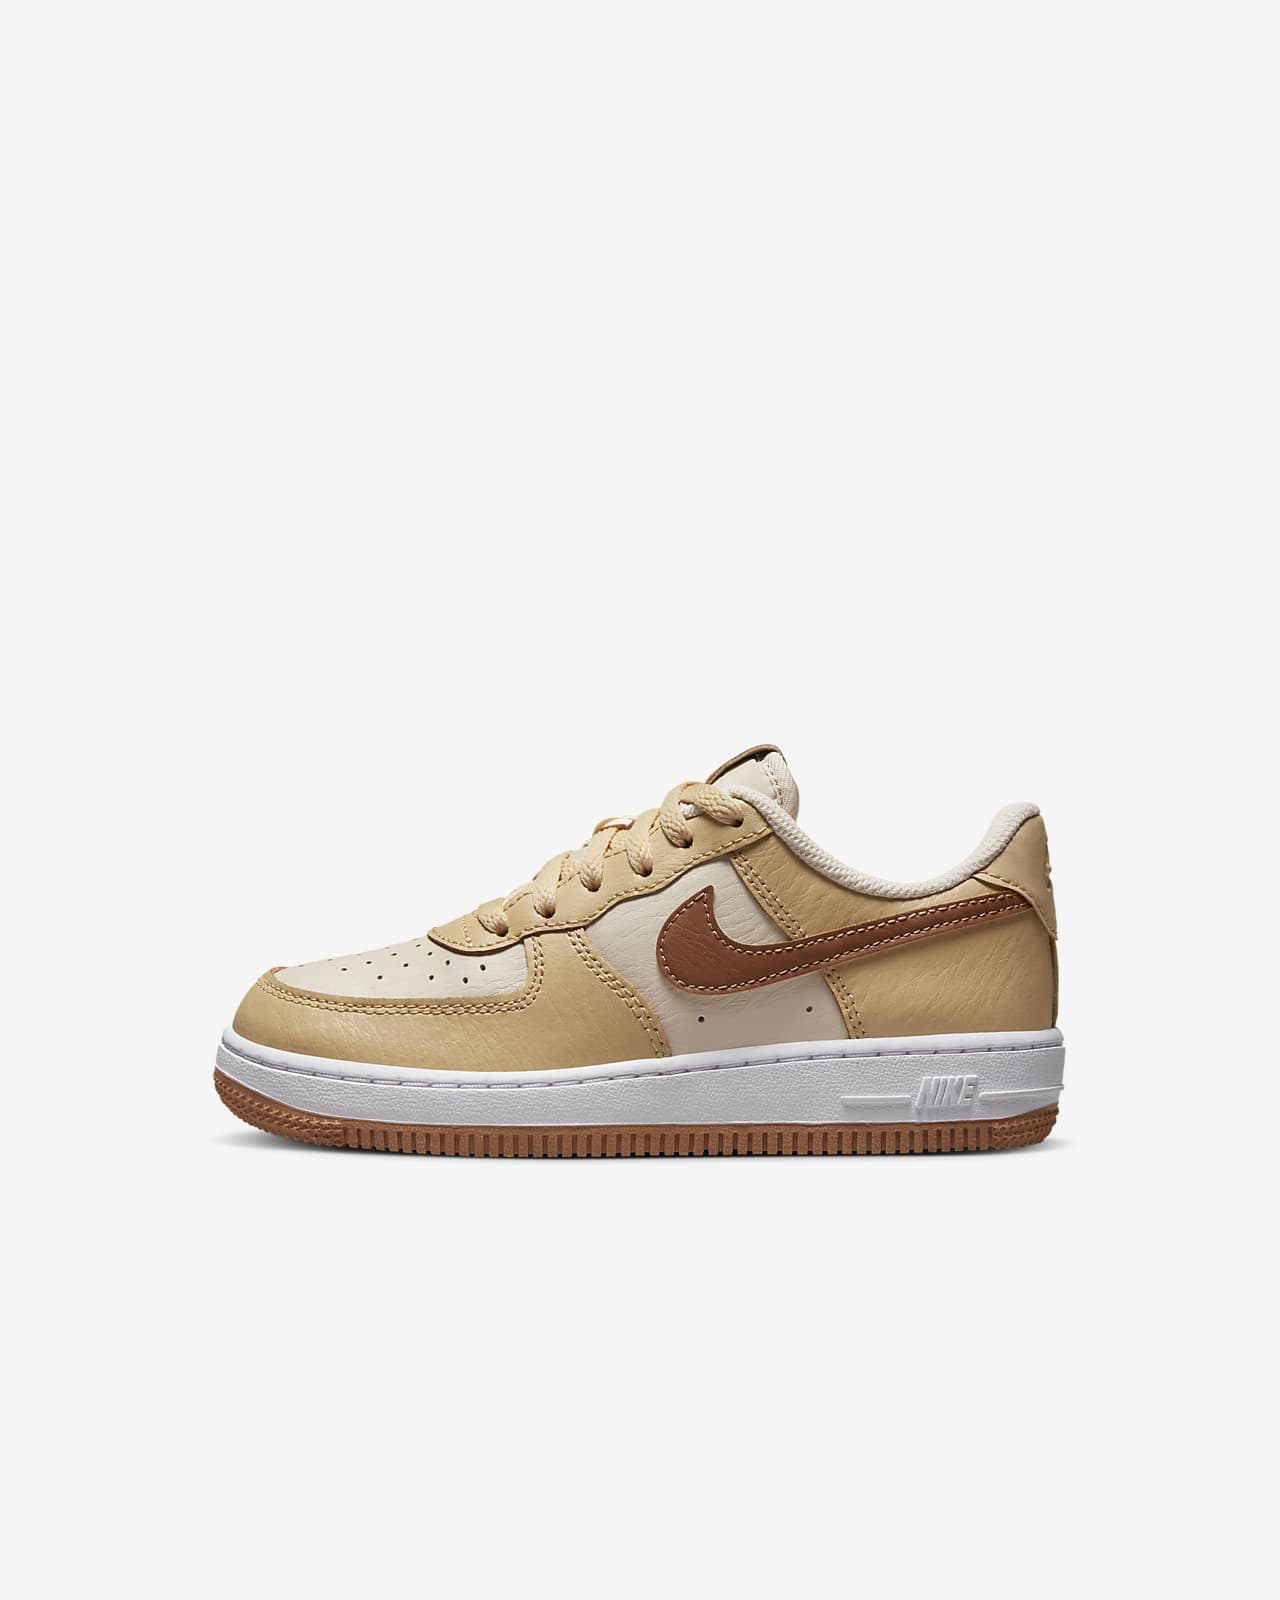 Nike Air force 1 LV8 little toddler kids shoes